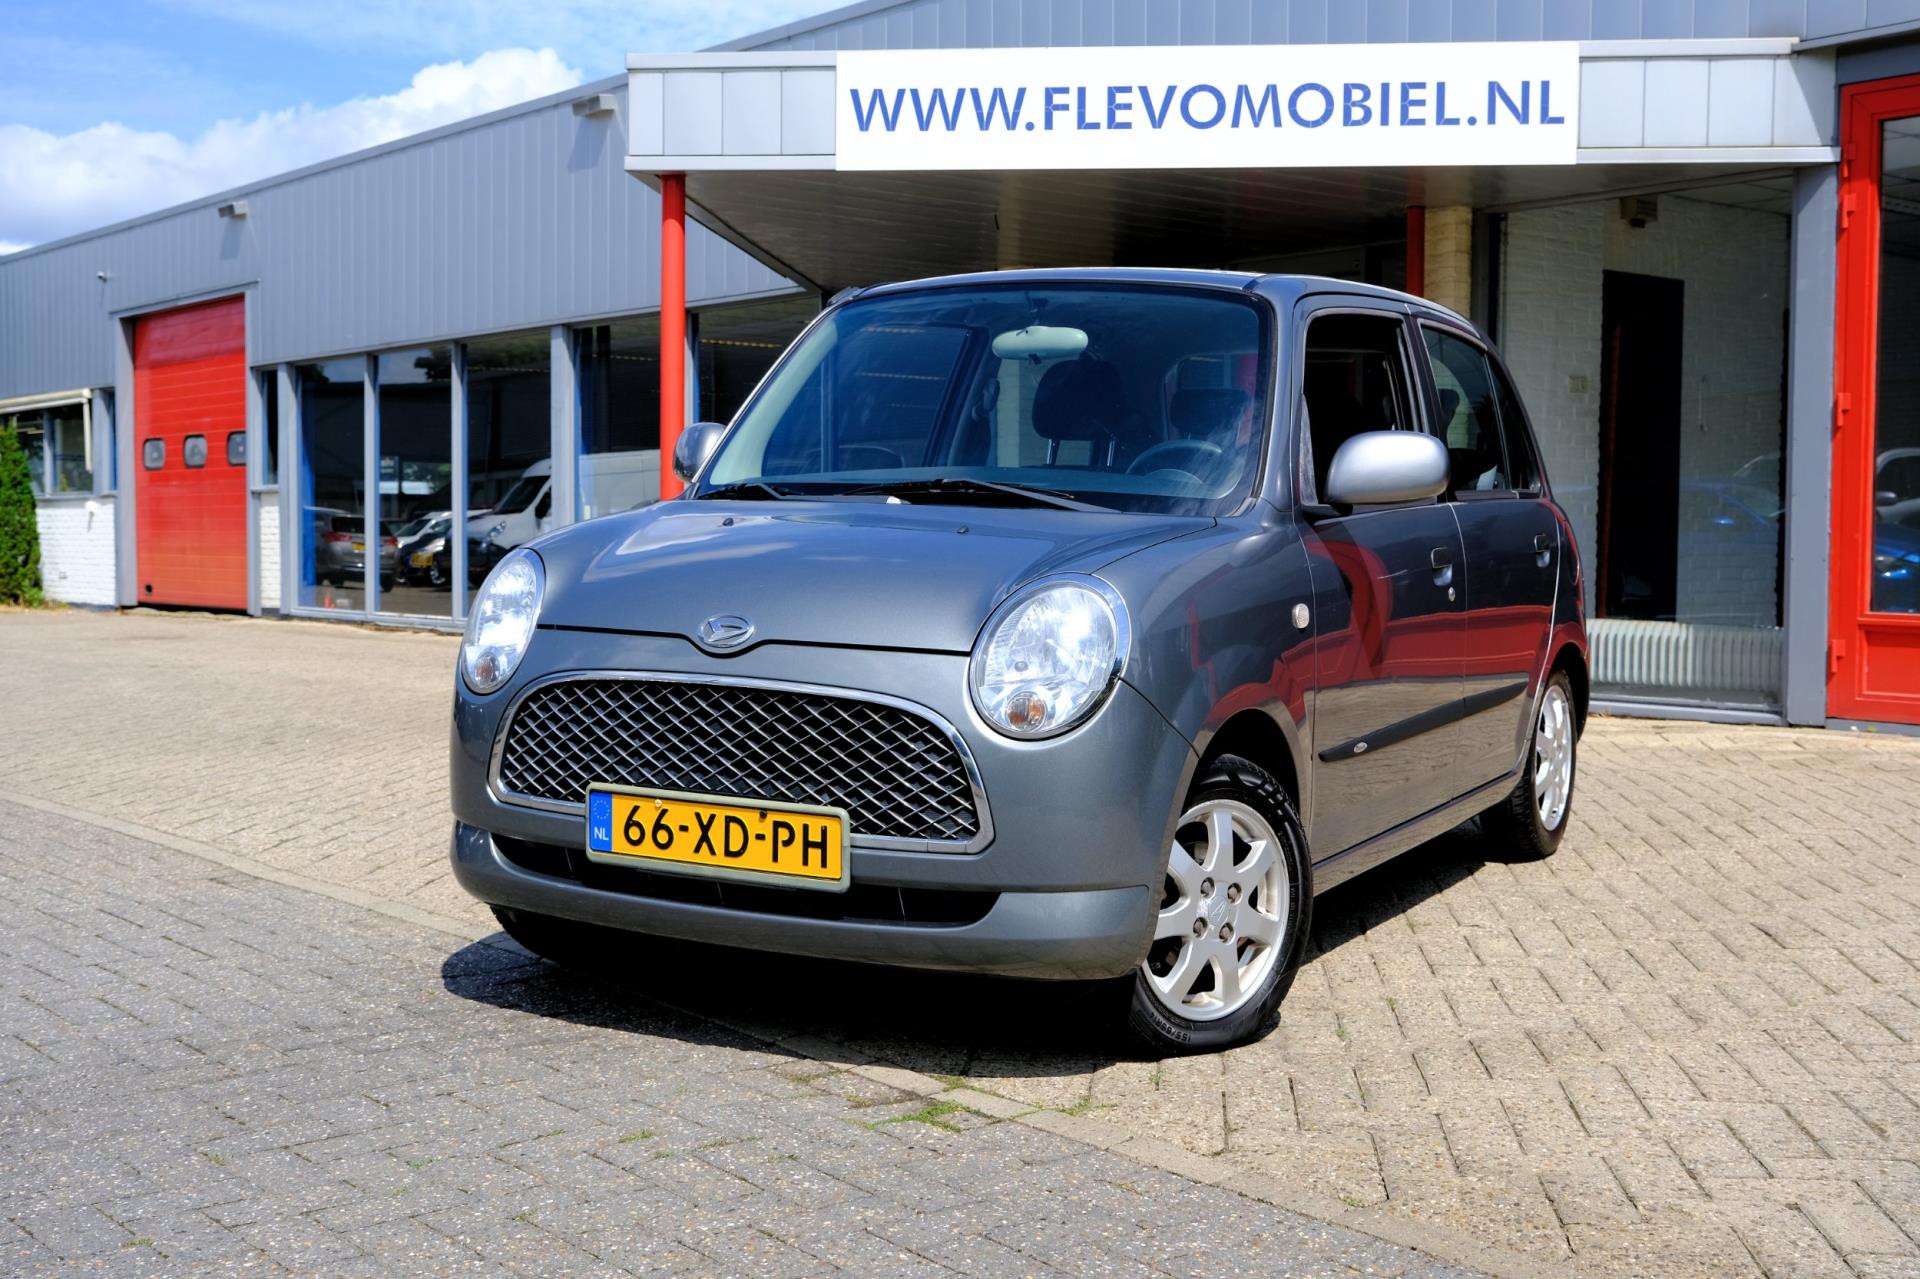 Daihatsu Trevis Compact in Grey used in DRONTEN for € 2,950.-